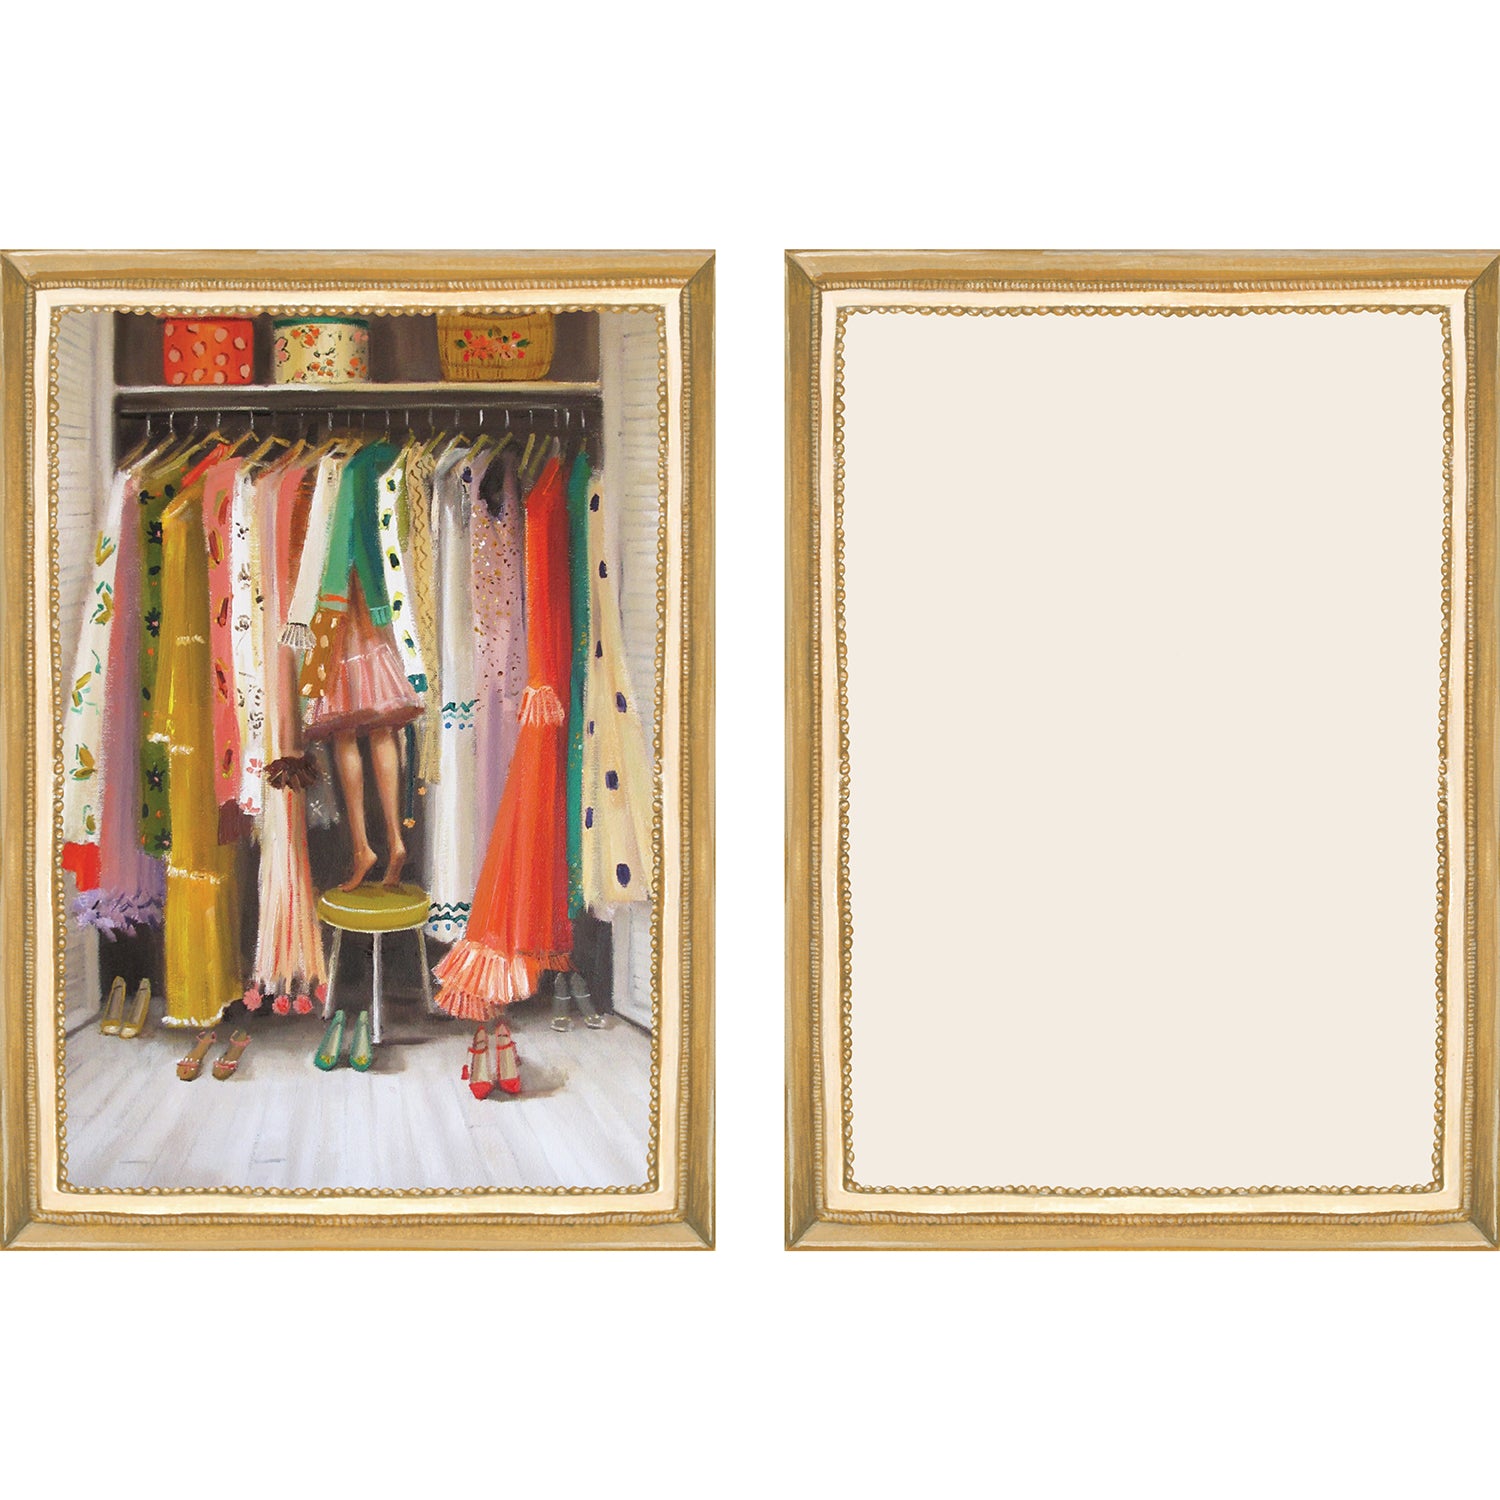 The illustrated front and blank back of a Flat Note, both sides framed in gold, featuring a painterly illustration of a young girl on a stool exploring the luxurious dresses packed into a closet.